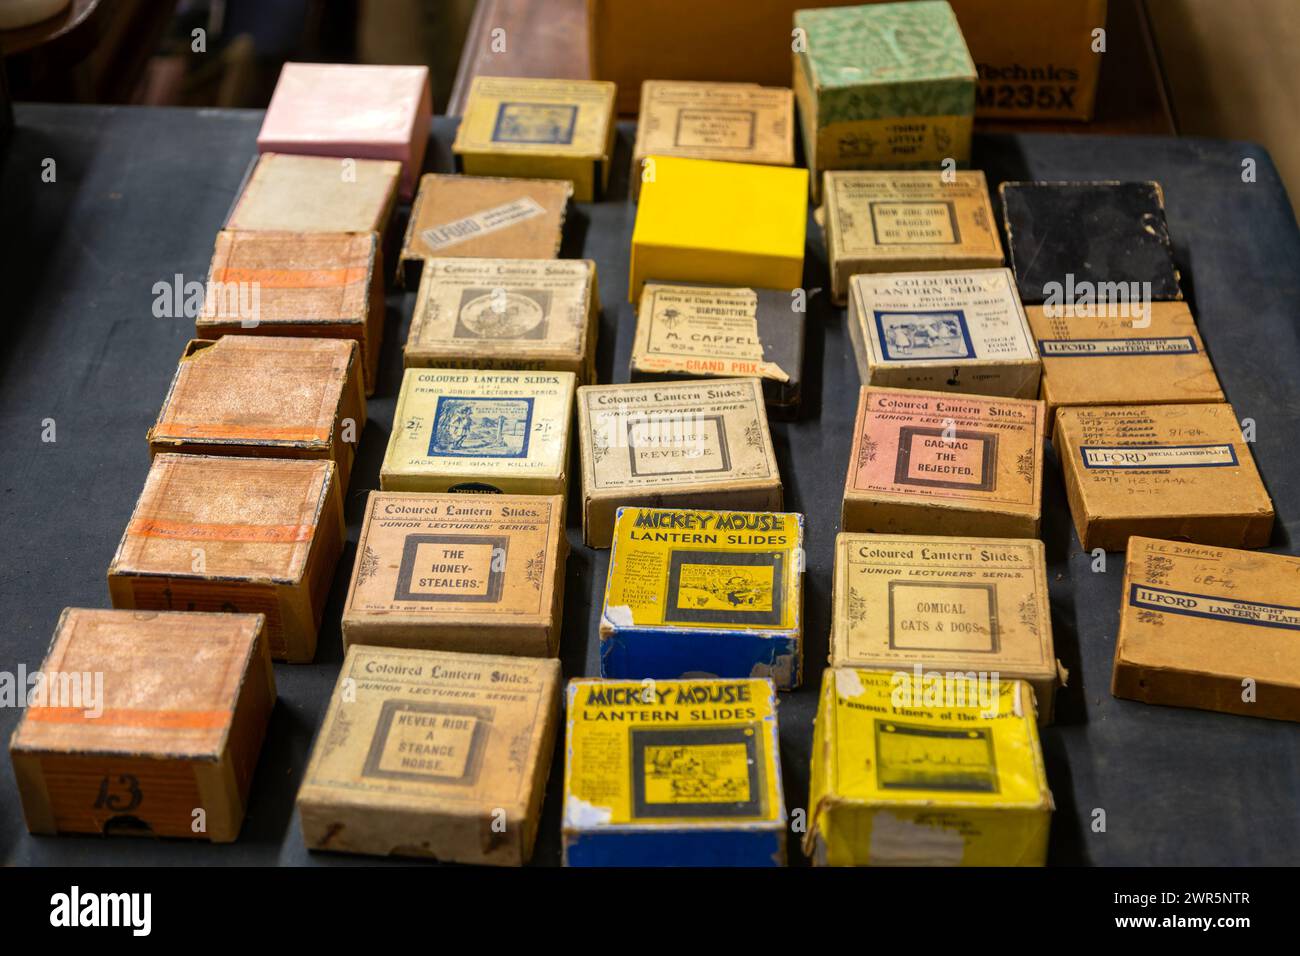 Boxes of commercial magic lantern slides on table top display, UK Stock Photo